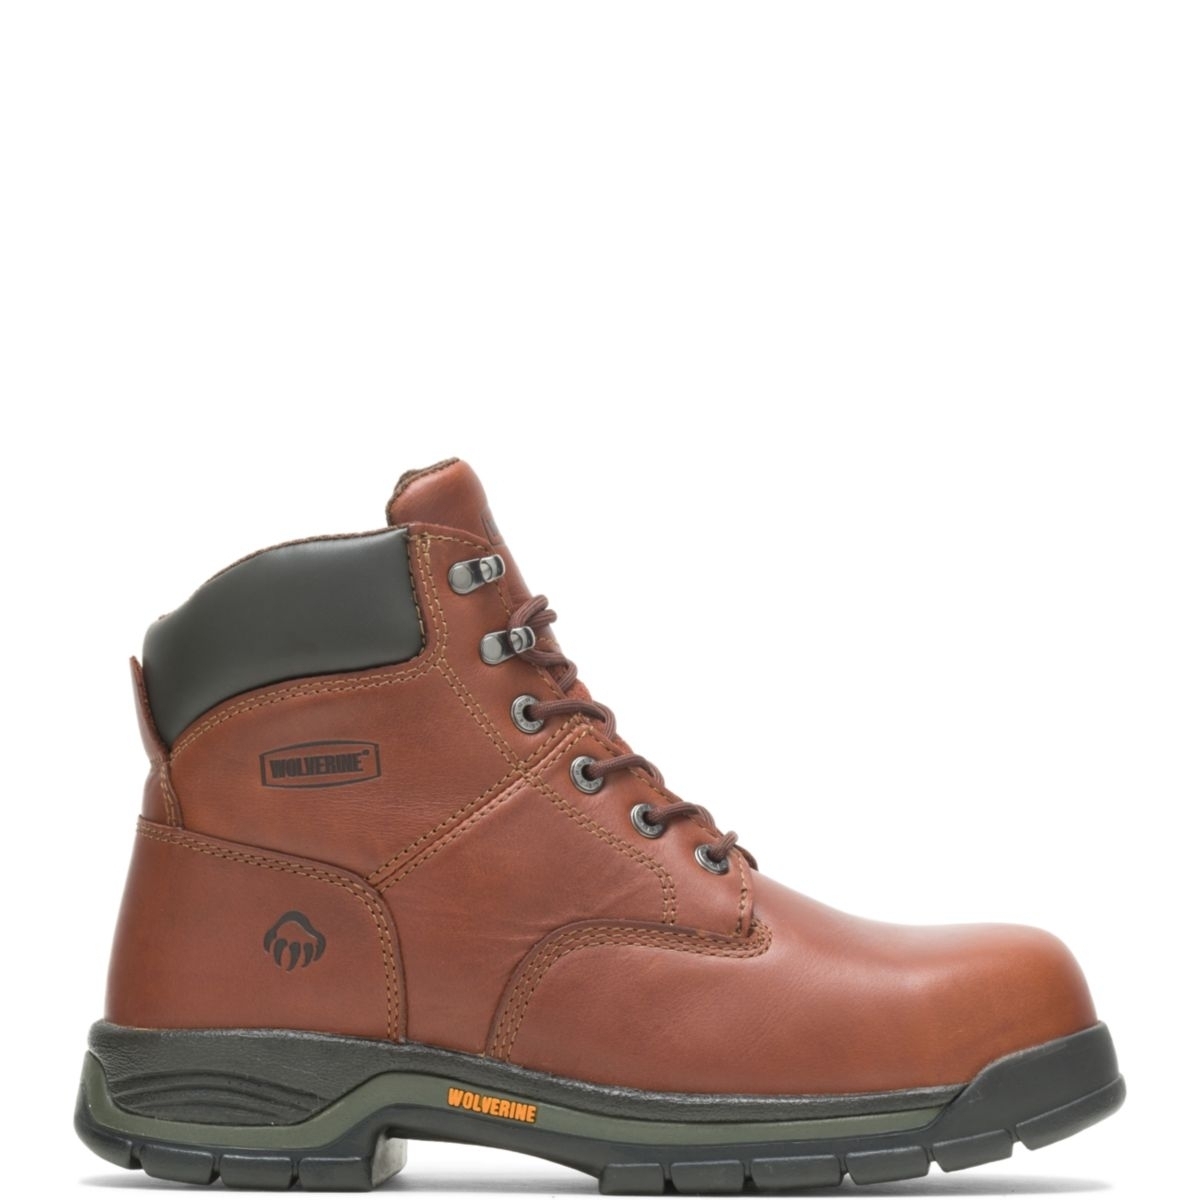 WOLVERINE Men's Harrison 6 Lace-Up SoftToe Work Boot Brown - W04906 Varies BROWN - BROWN, 12